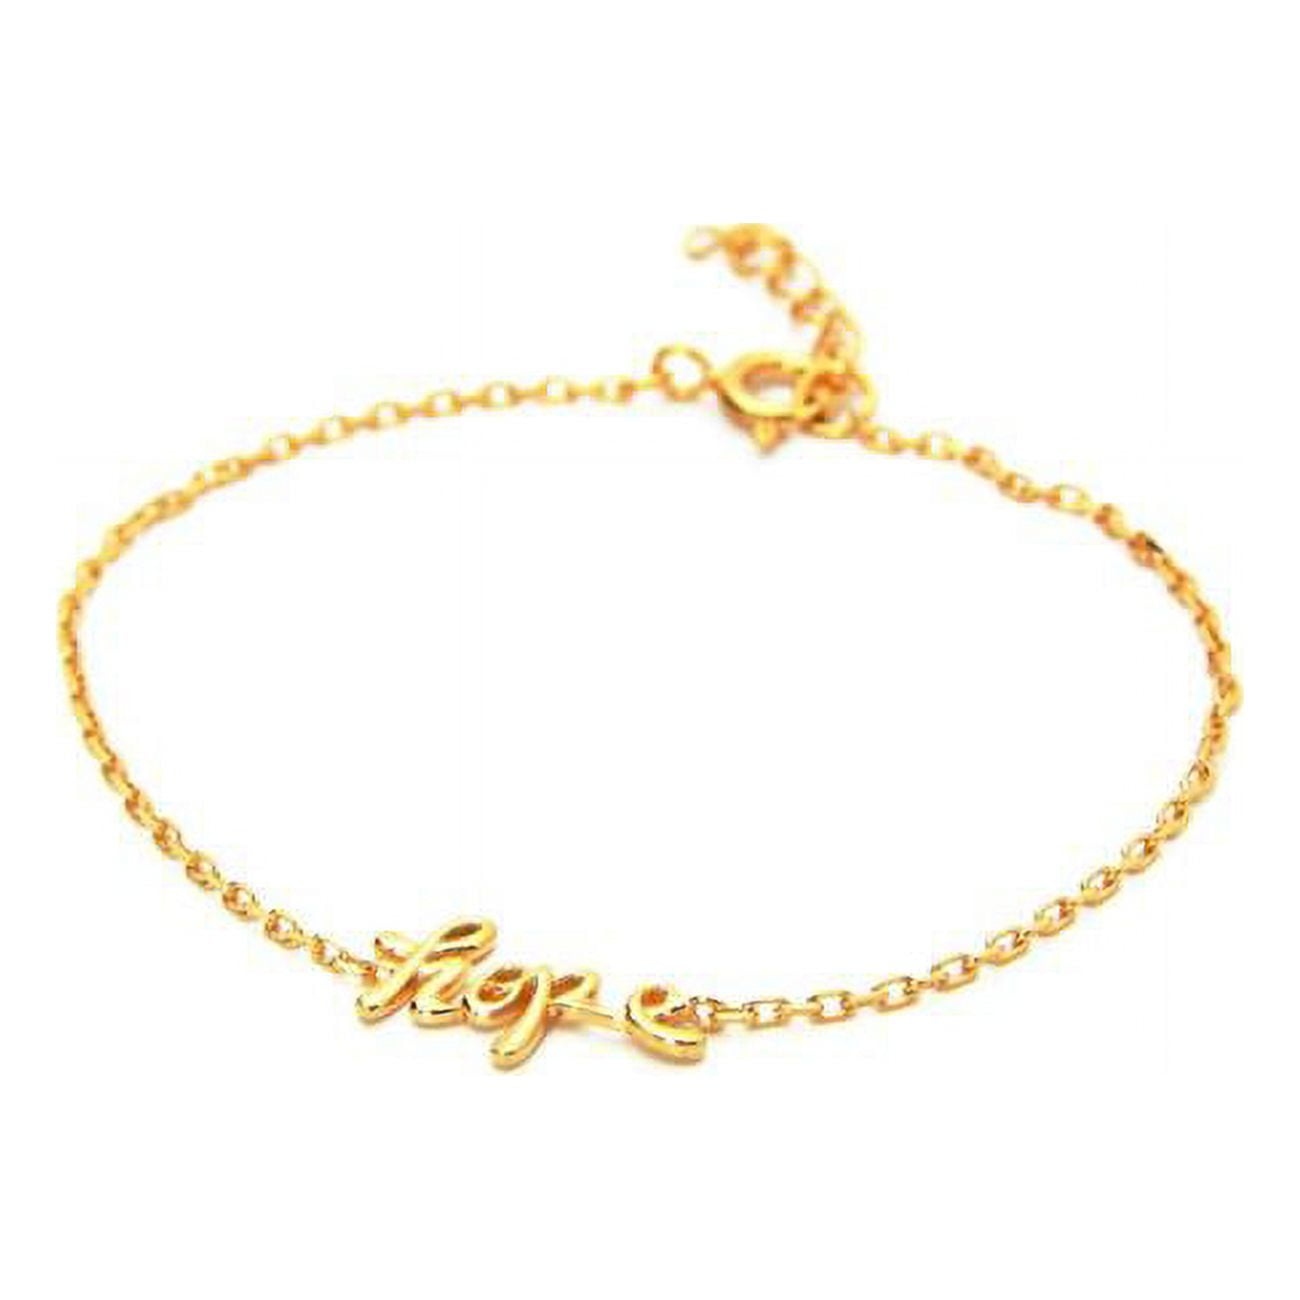 212353g 6 In. 925 Sterling Silver Cursive Hope Charm Bracelet Dipped In Gold